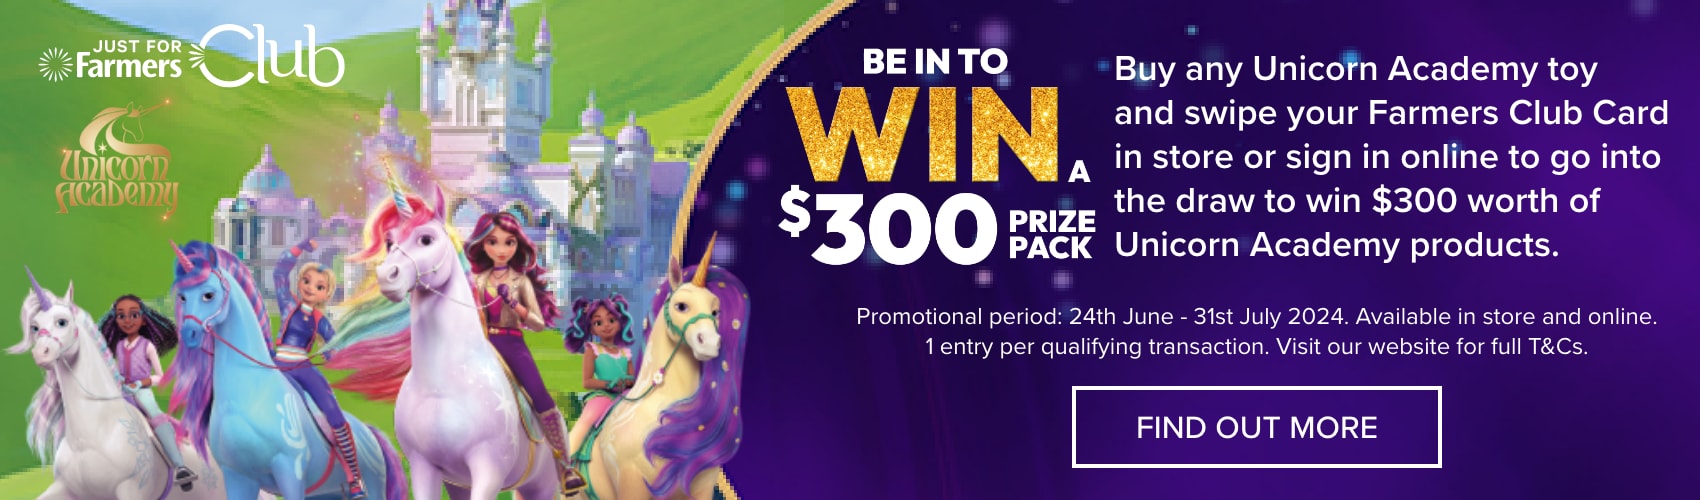 Unicorn Academy Competition- Be in to WIN $300 Prize Pack